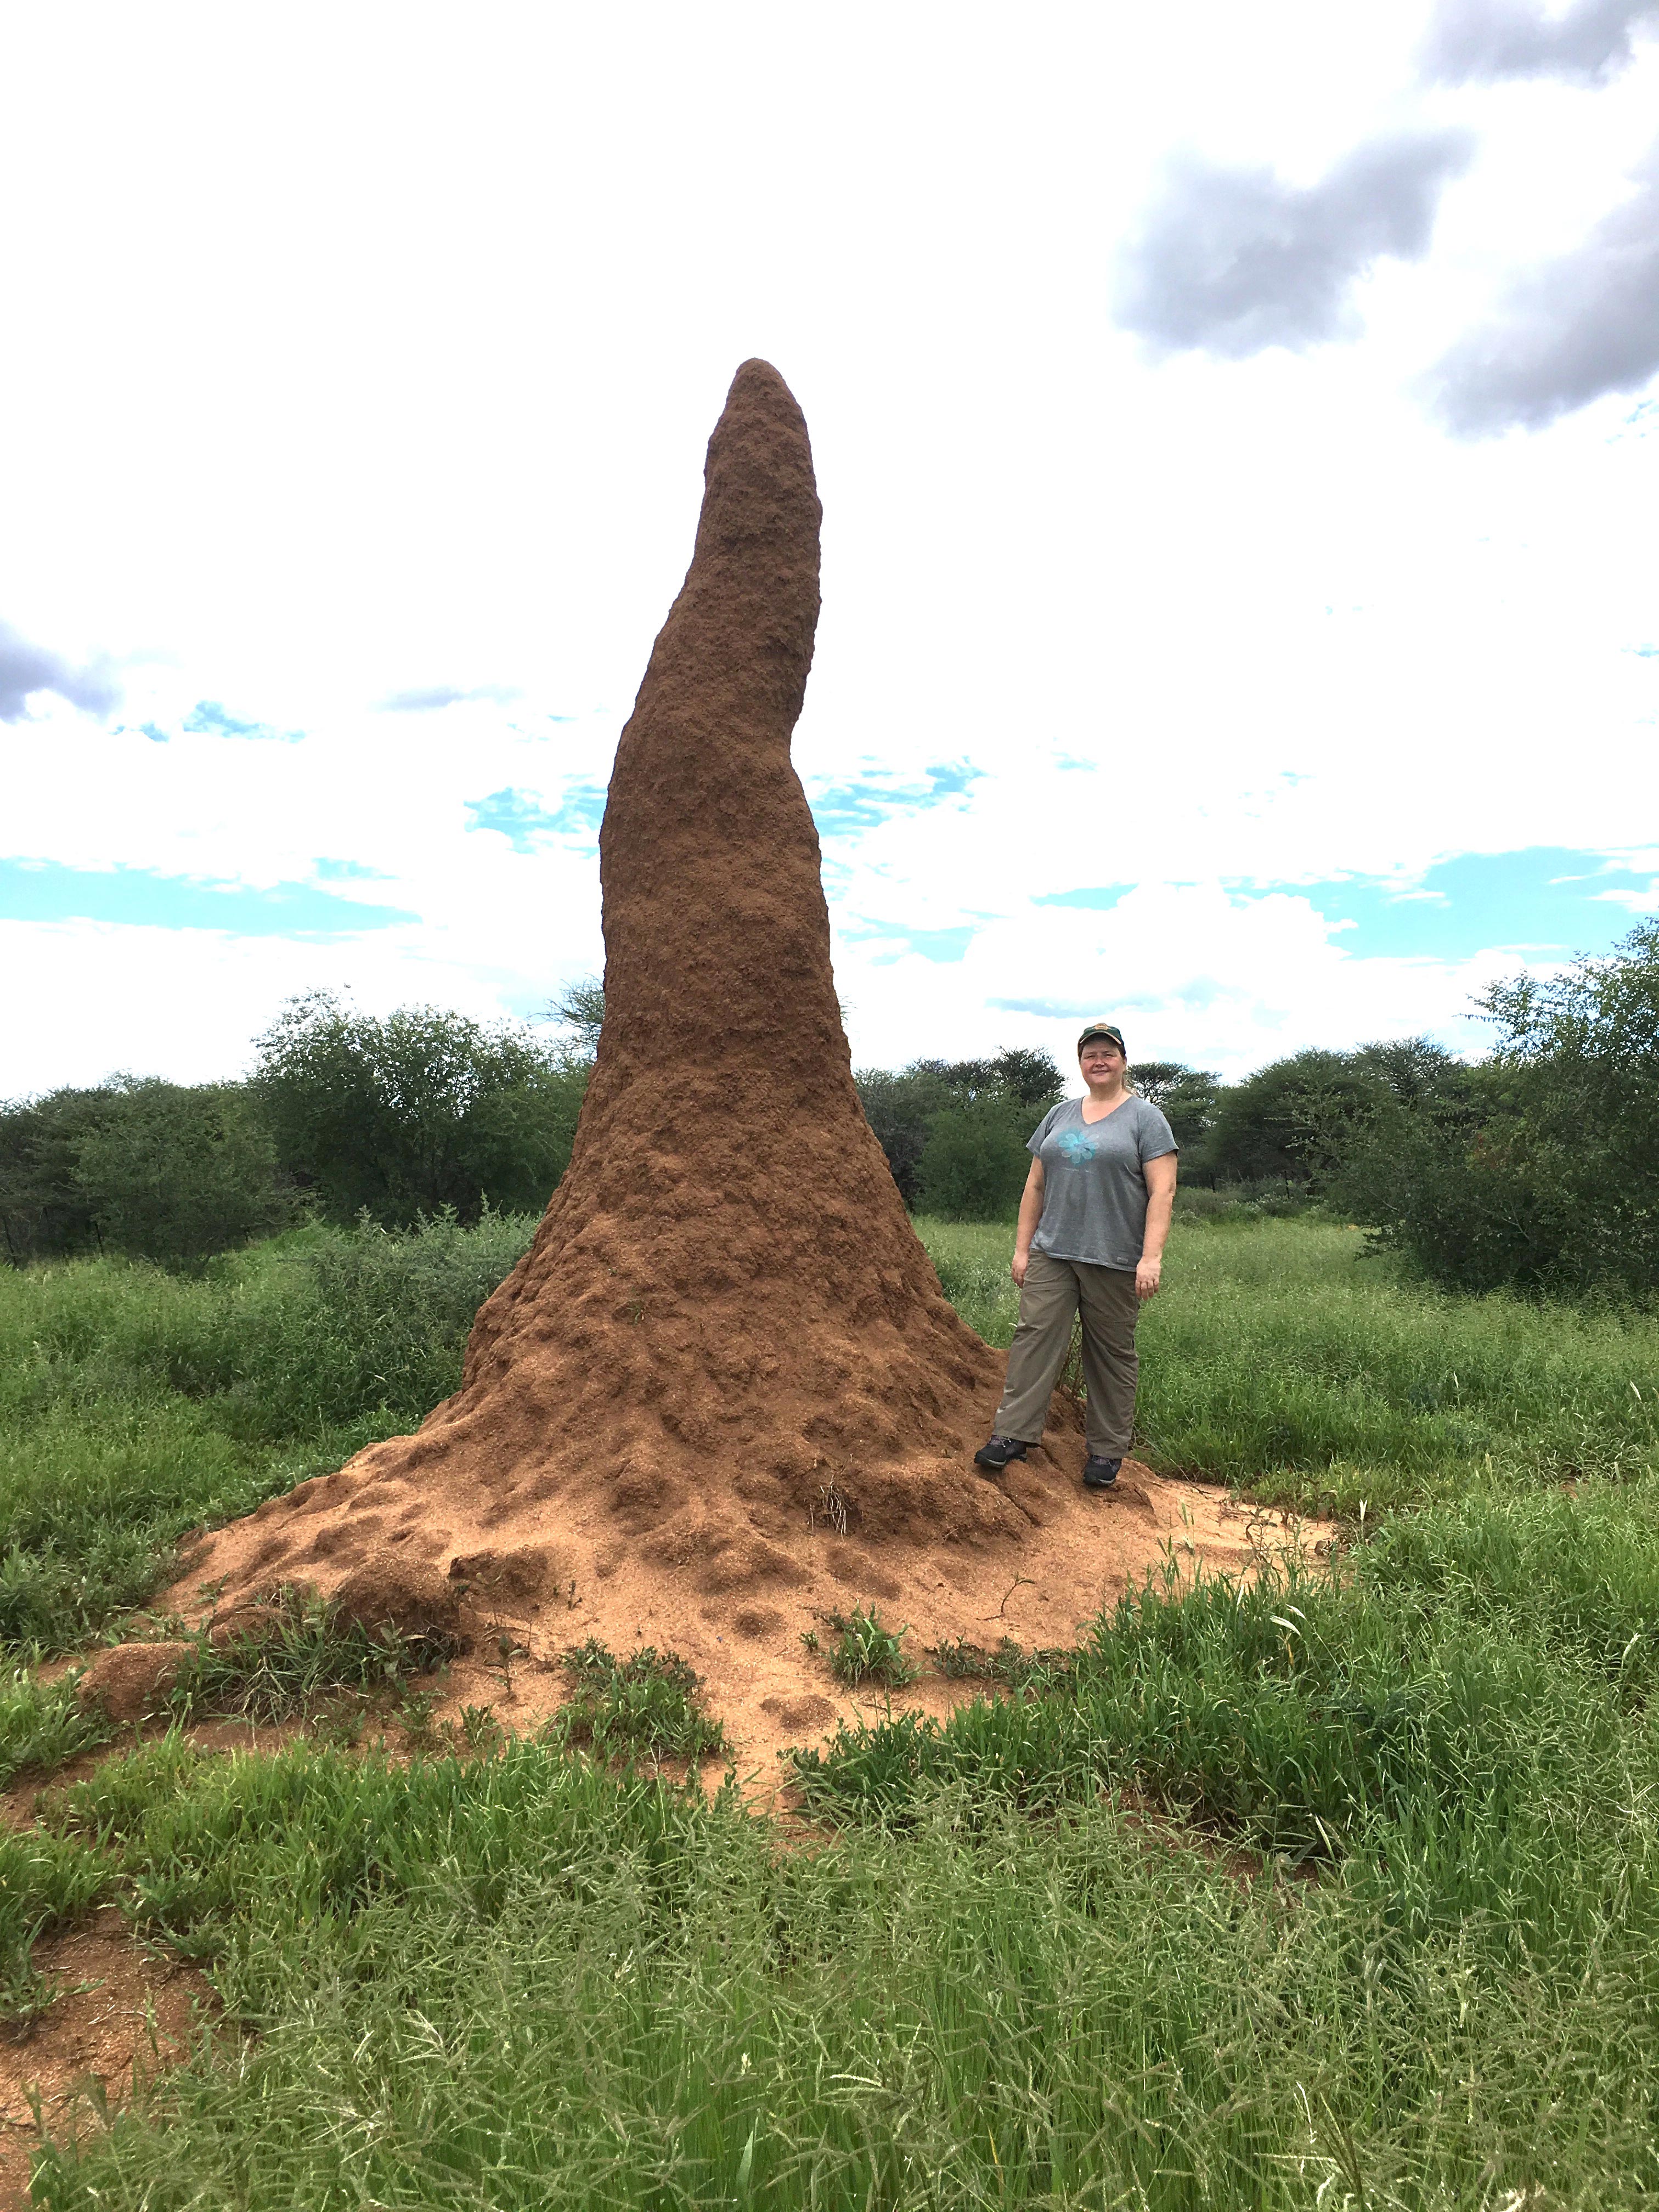 Termite Mounds Hide Secrets To Sustainable Buildings Of The Future